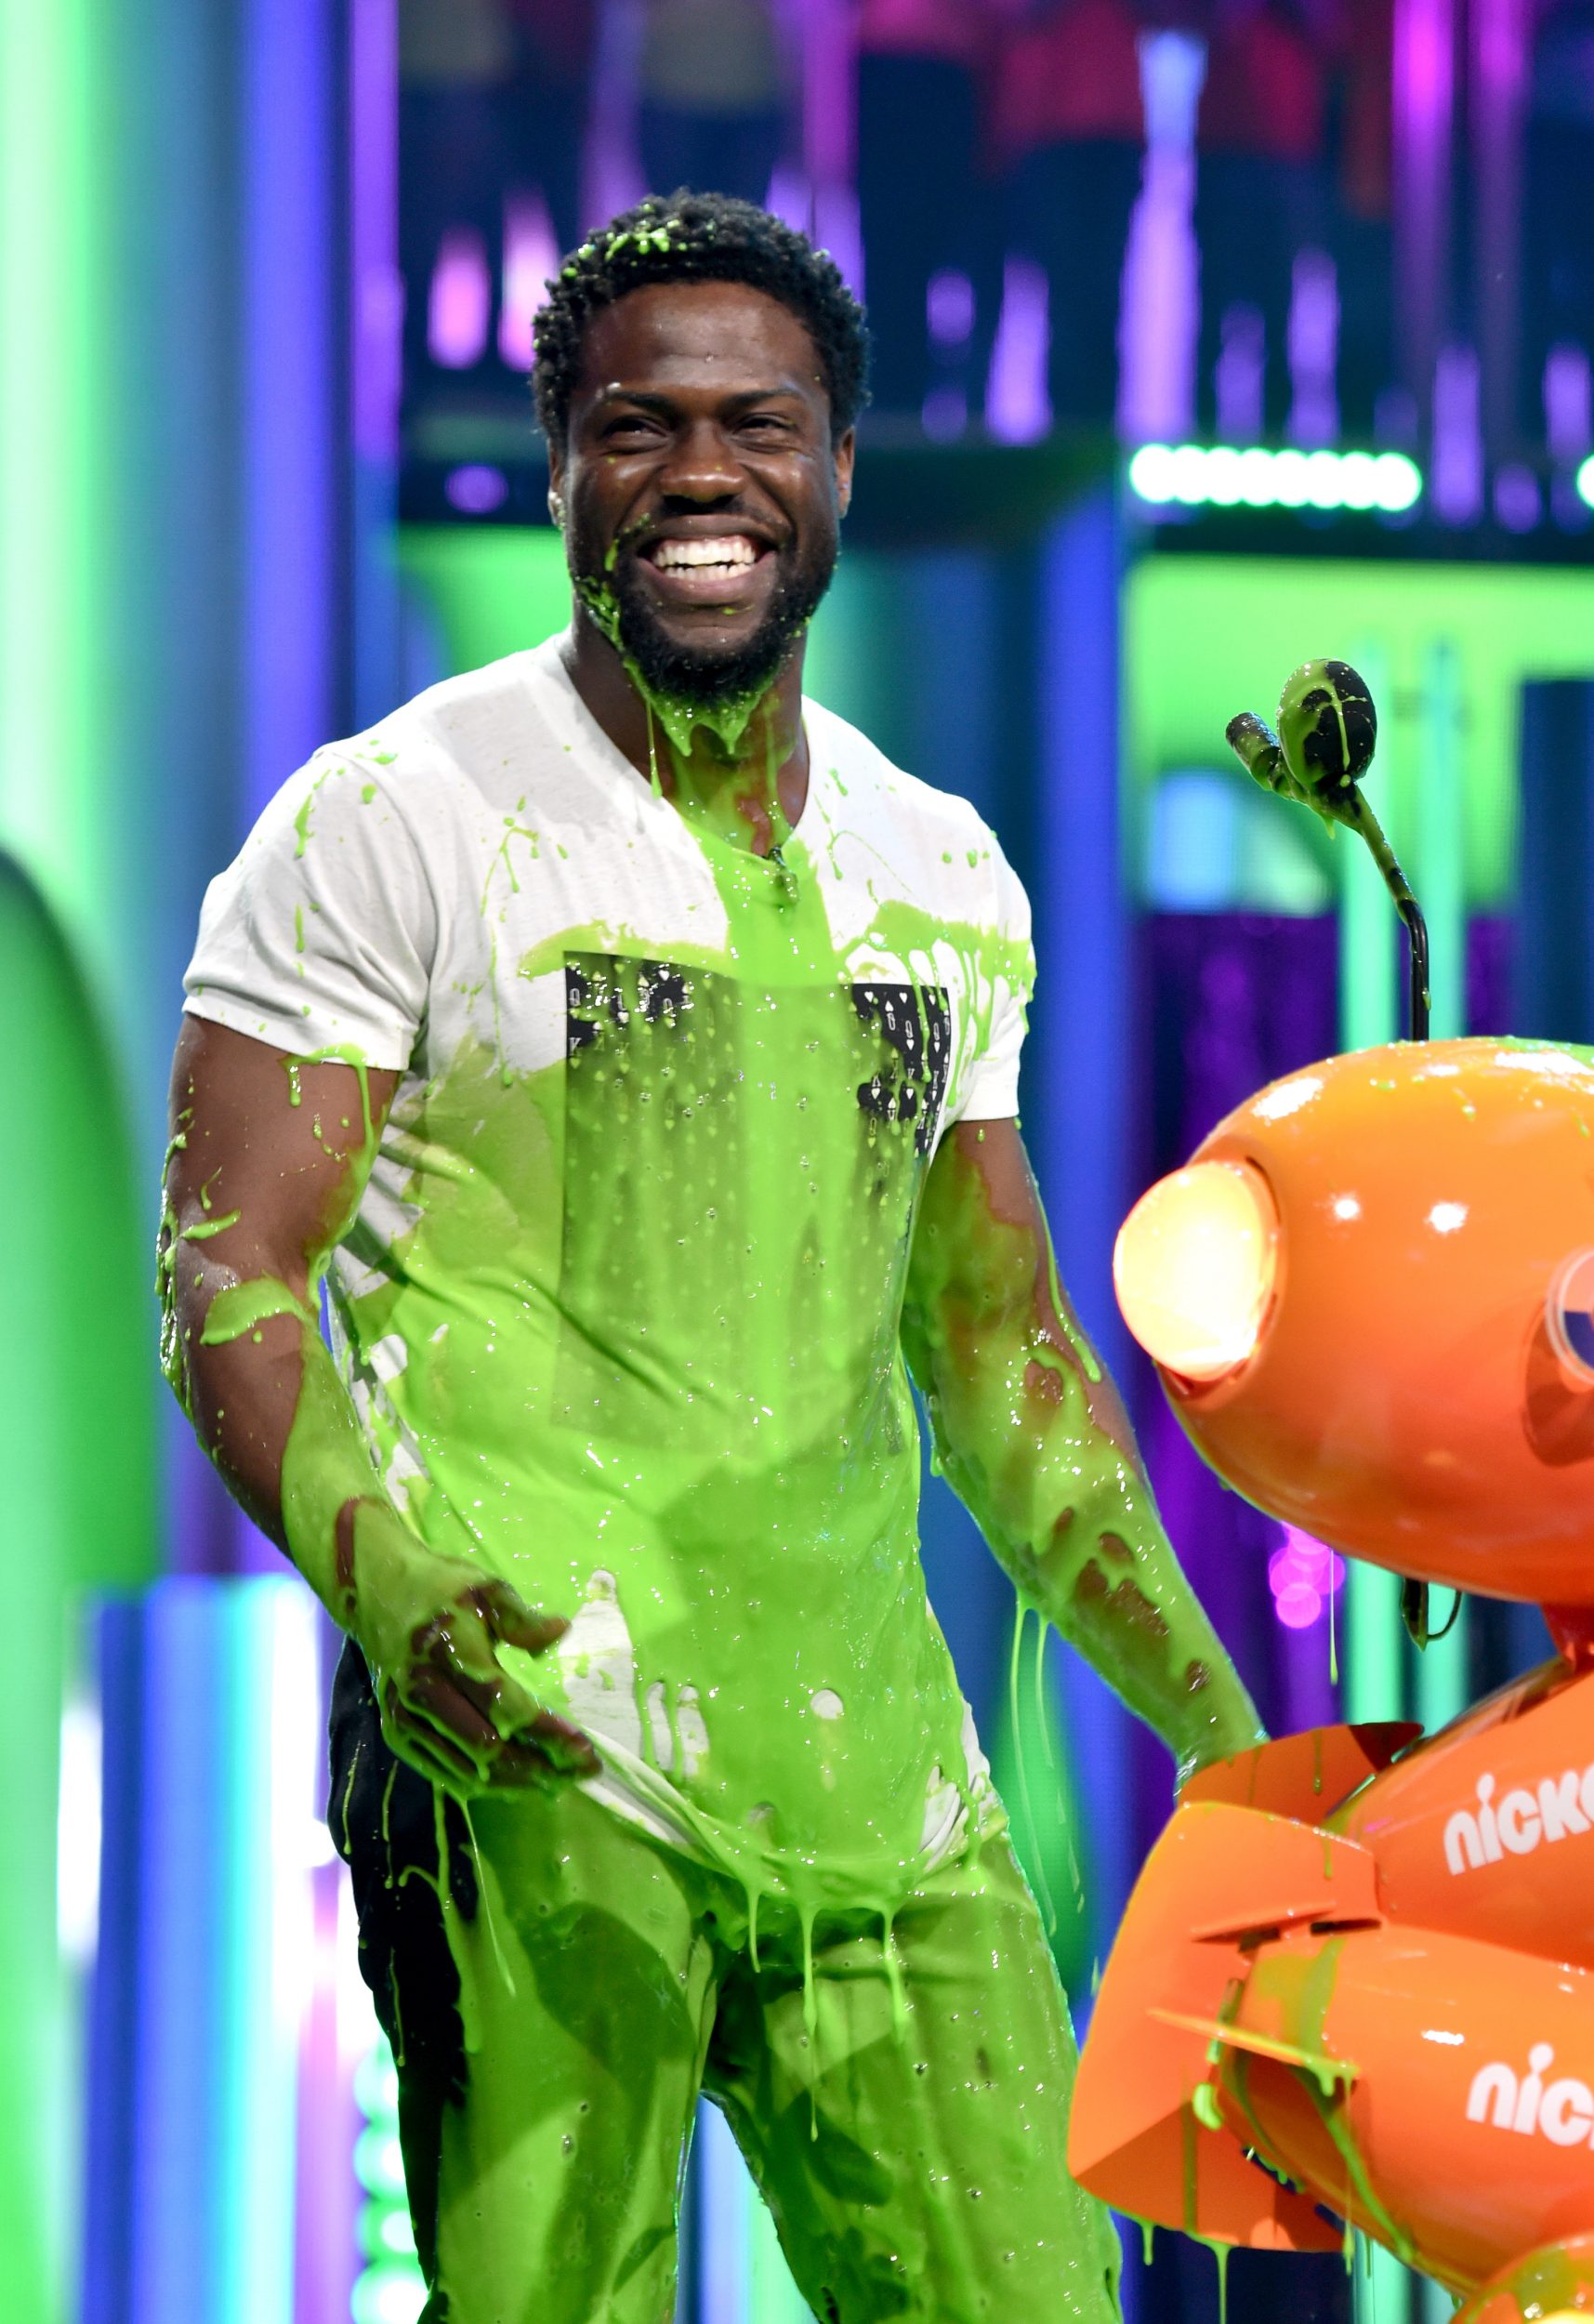 LOS ANGELES, CA - MARCH 11:  Actor Kevin Hart gets slimed onstage at Nickelodeon's 2017 Kids' Choice Awards at USC Galen Center on March 11, 2017 in Los Angeles, California.  (Photo by Frazer Harrison/KCA2017/Getty Images for Nickelodeon - Issued to Media by Nickelodeon)